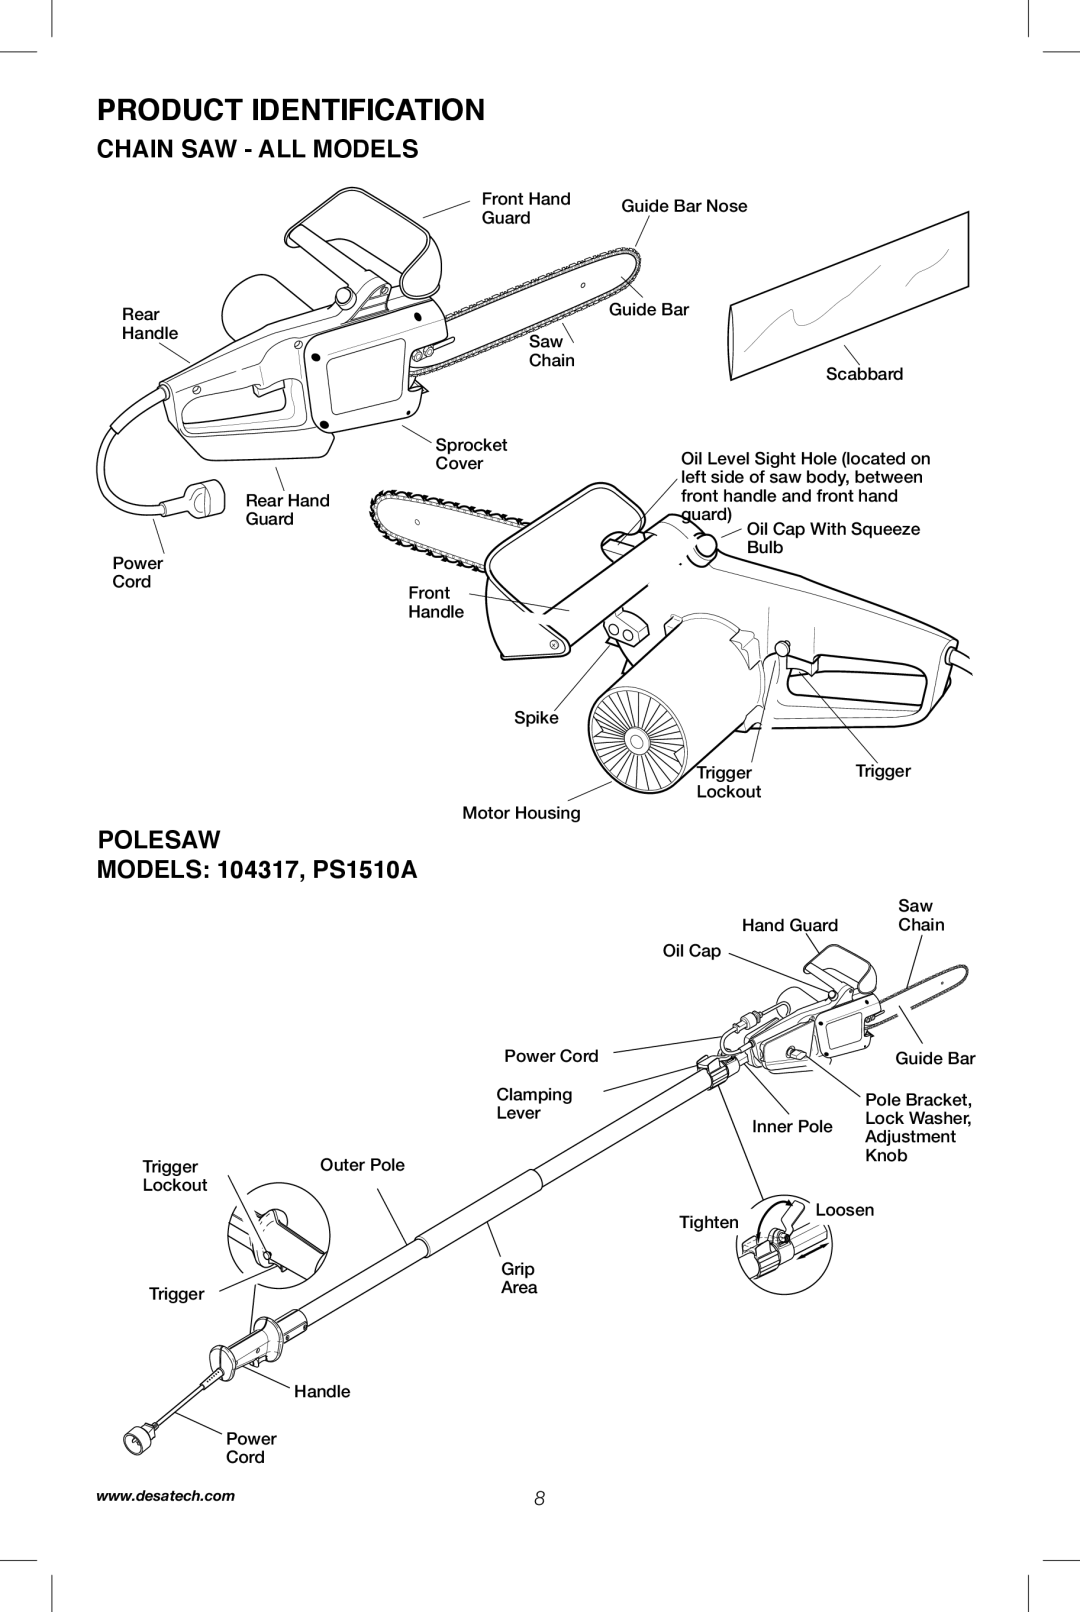 Remington Power Tools RPS2N1, 104317, PS1510A manual Product Identification, CHAIN SAW - All Models 